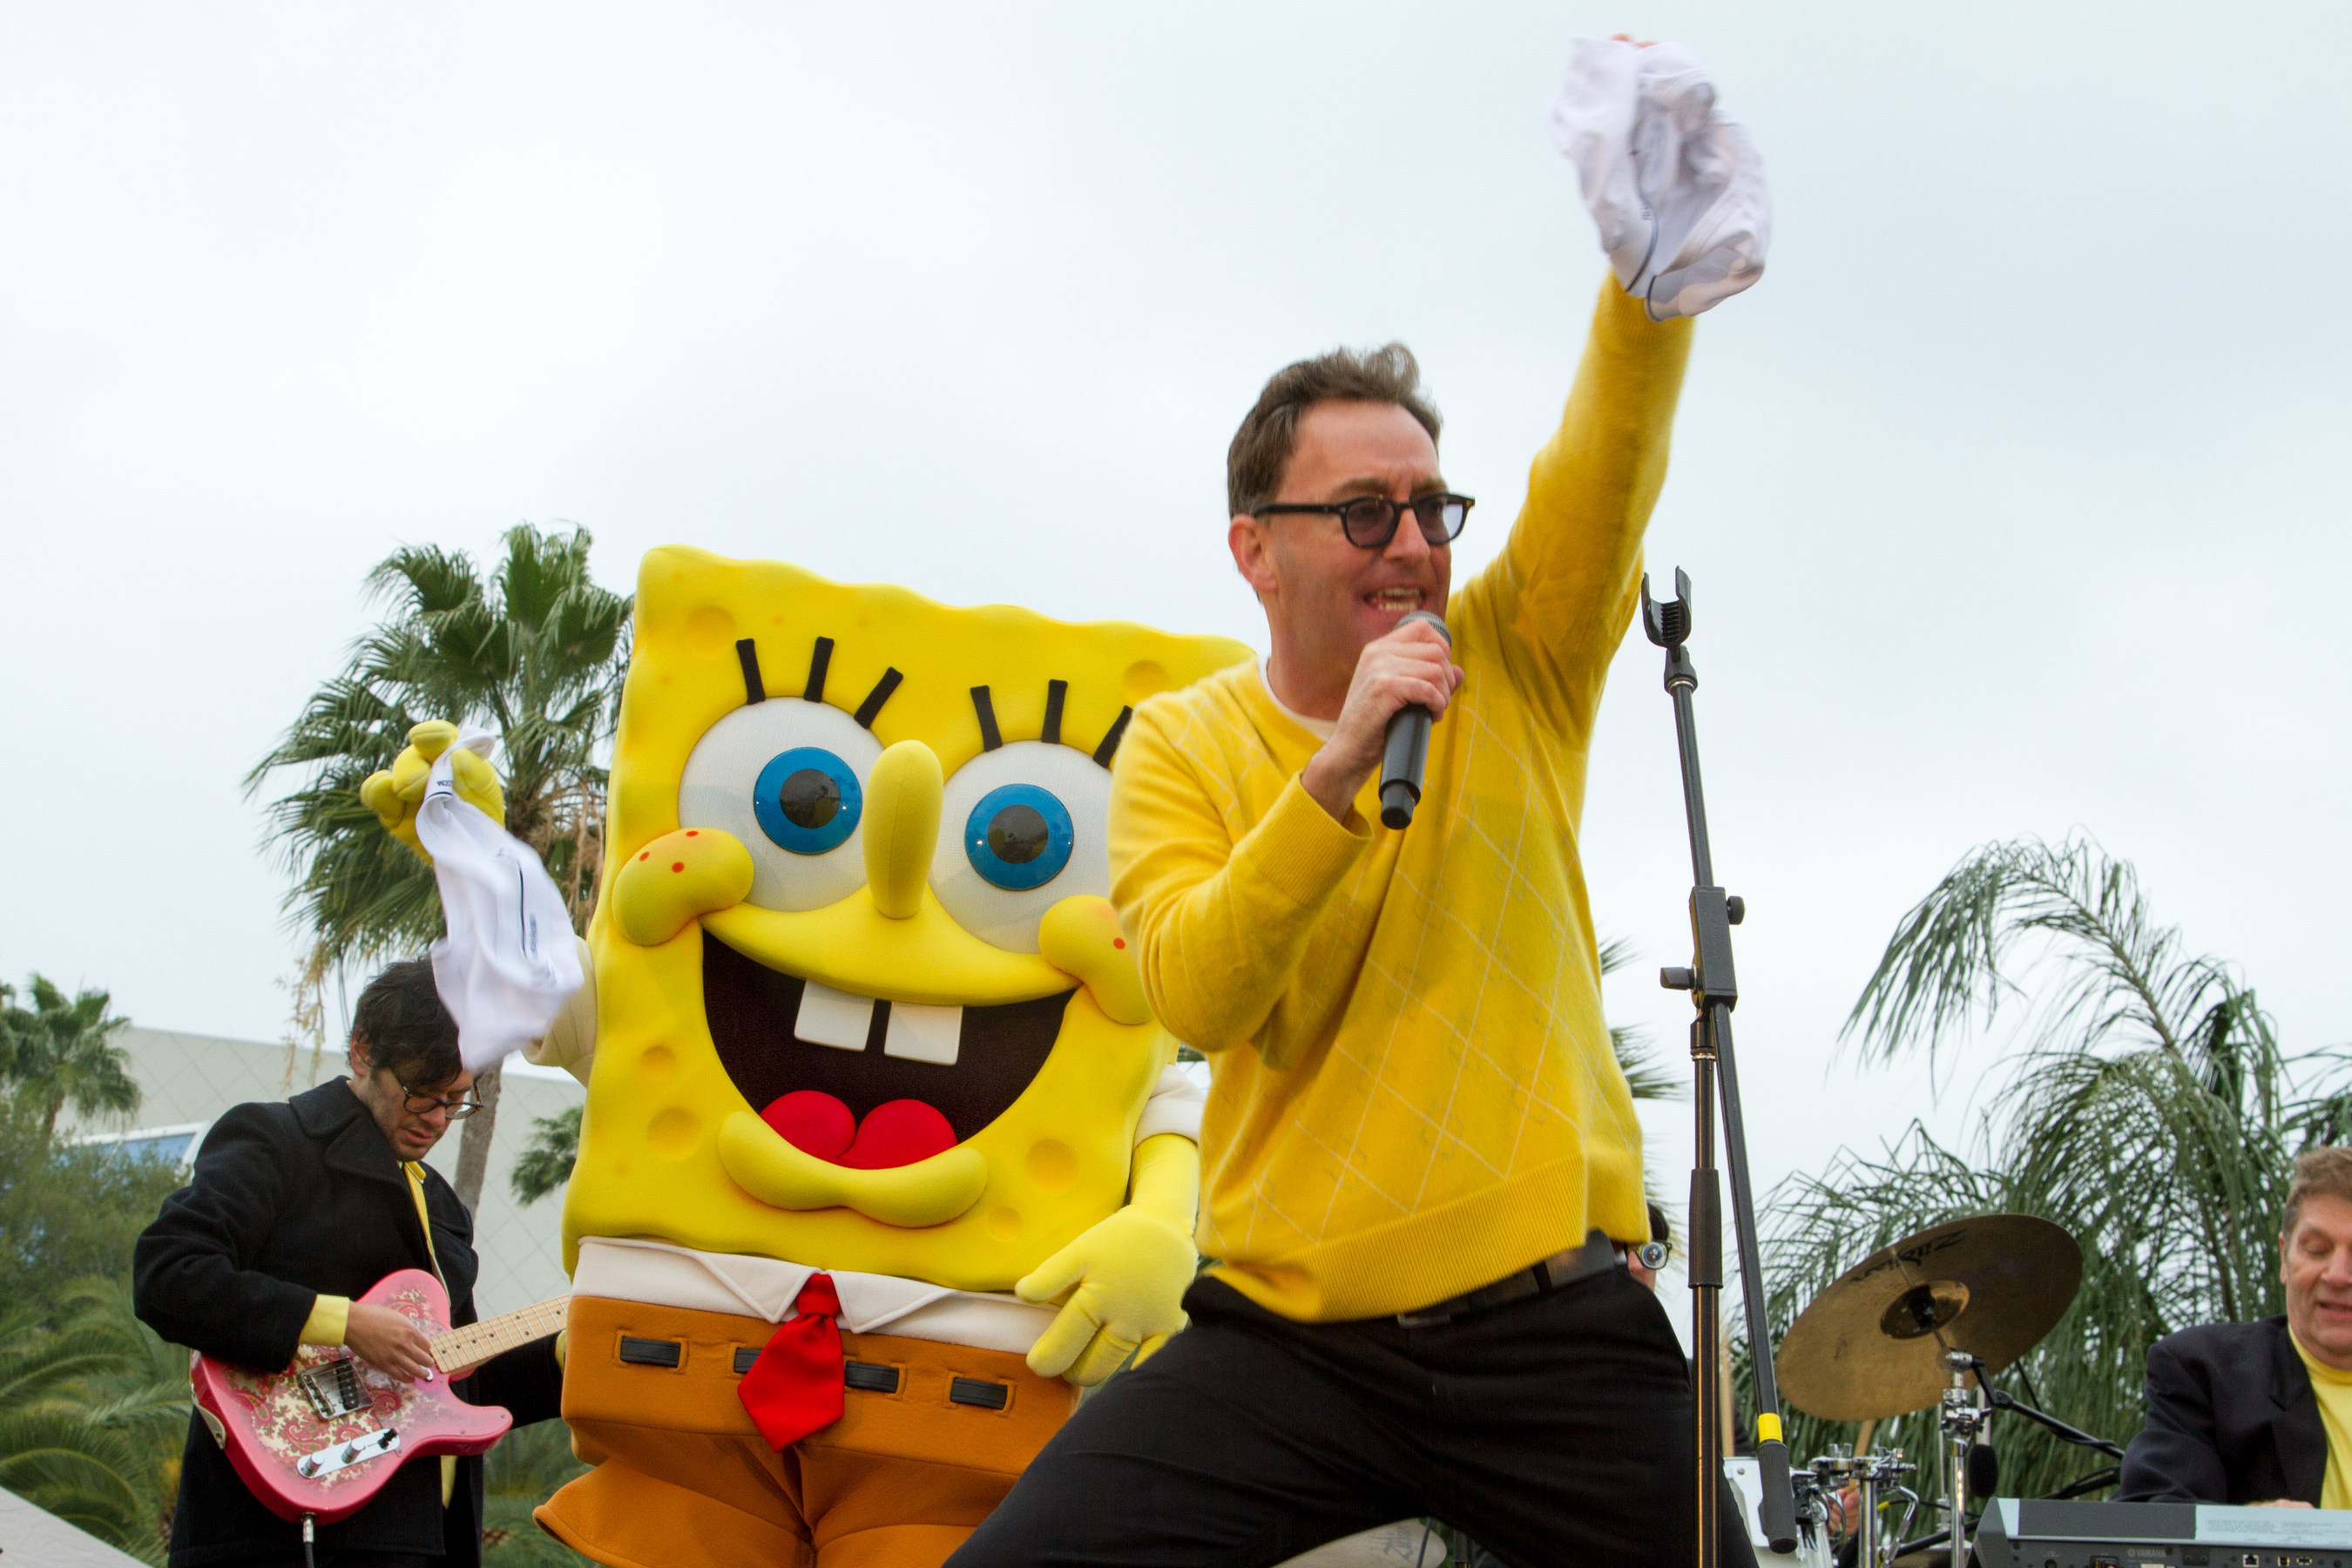 Tom Kenny, the voice of SpongeBob SquarePants and the Hi Seas band performed for an energetic crowd at the grand opening of the new attraction, "ICE LAND Ice Sculptures with SpongeBob SquarePants" at Moody Gardens in Galveston, TX on Saturday